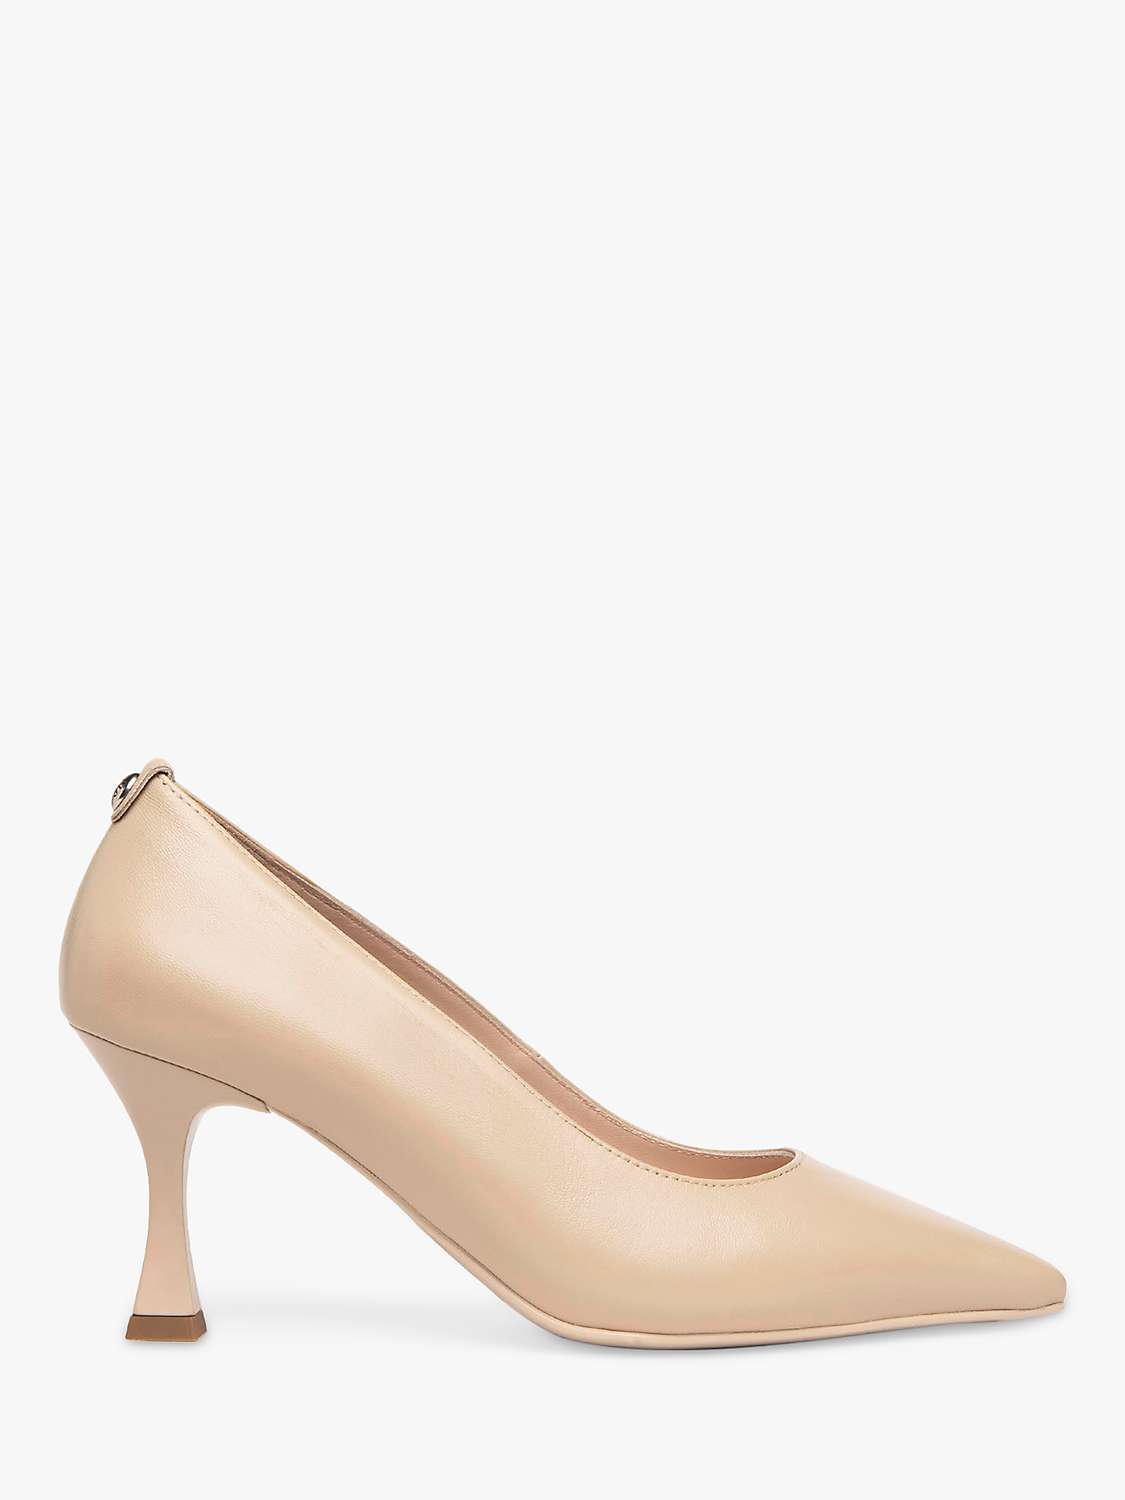 Buy NeroGiardini Leather Court Shoes Online at johnlewis.com